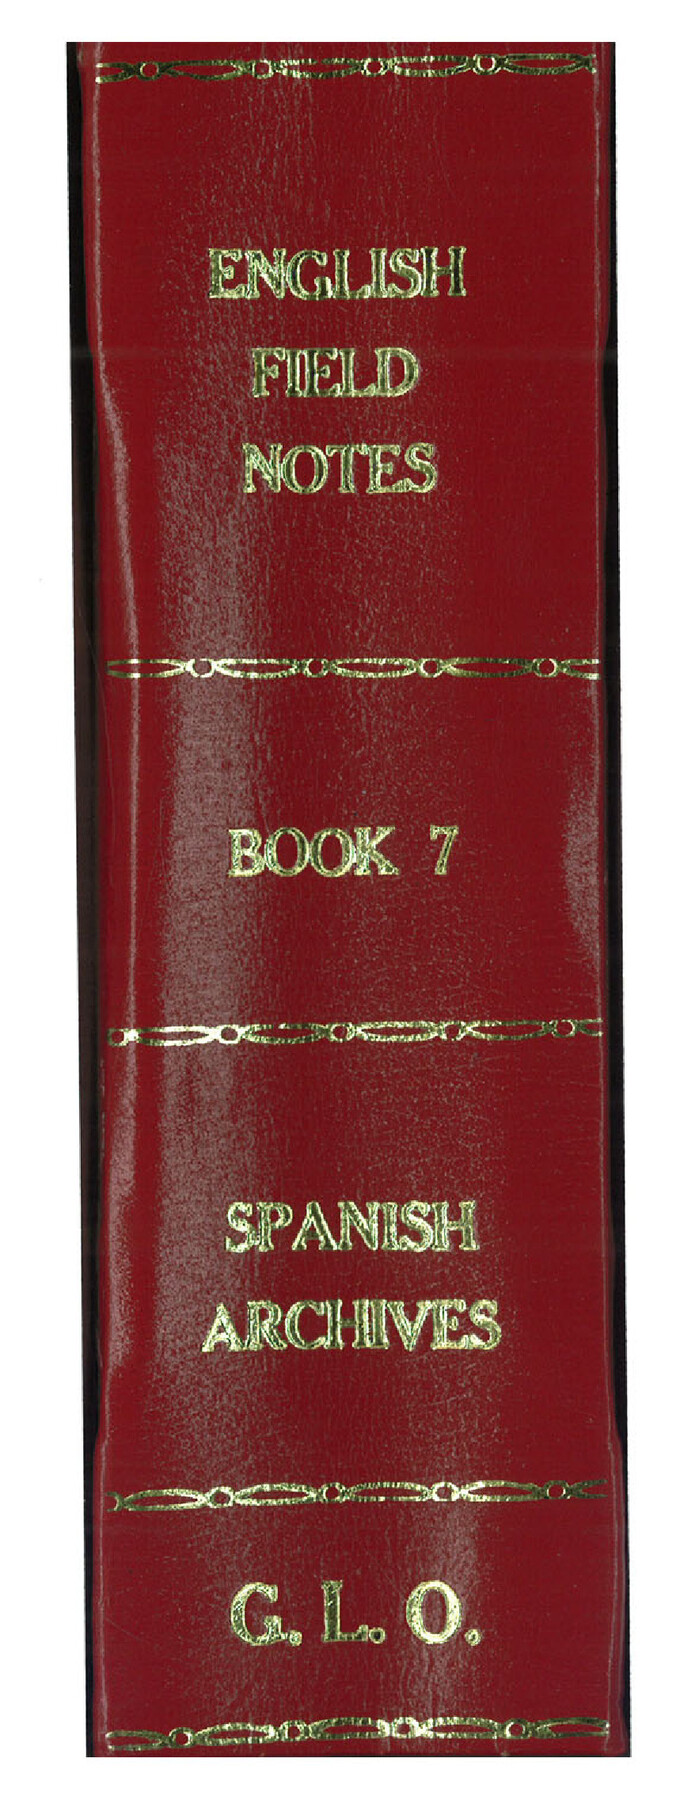 96533, English Field Notes of the Spanish Archives - Book 7, Historical Volumes